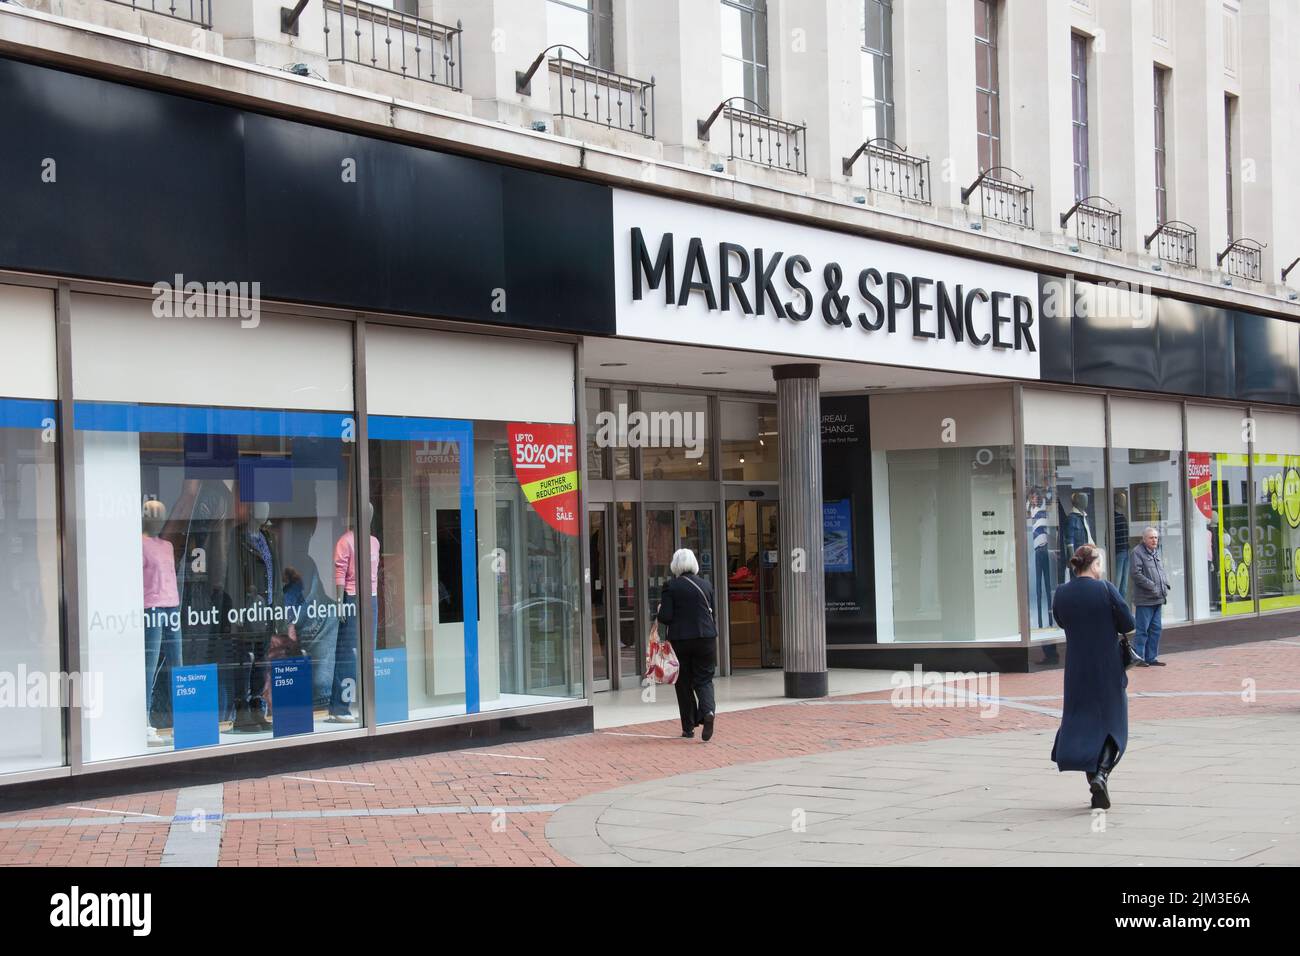 The Marks and Spencer shop in Reading, Berkshire in the UK Stock Photo